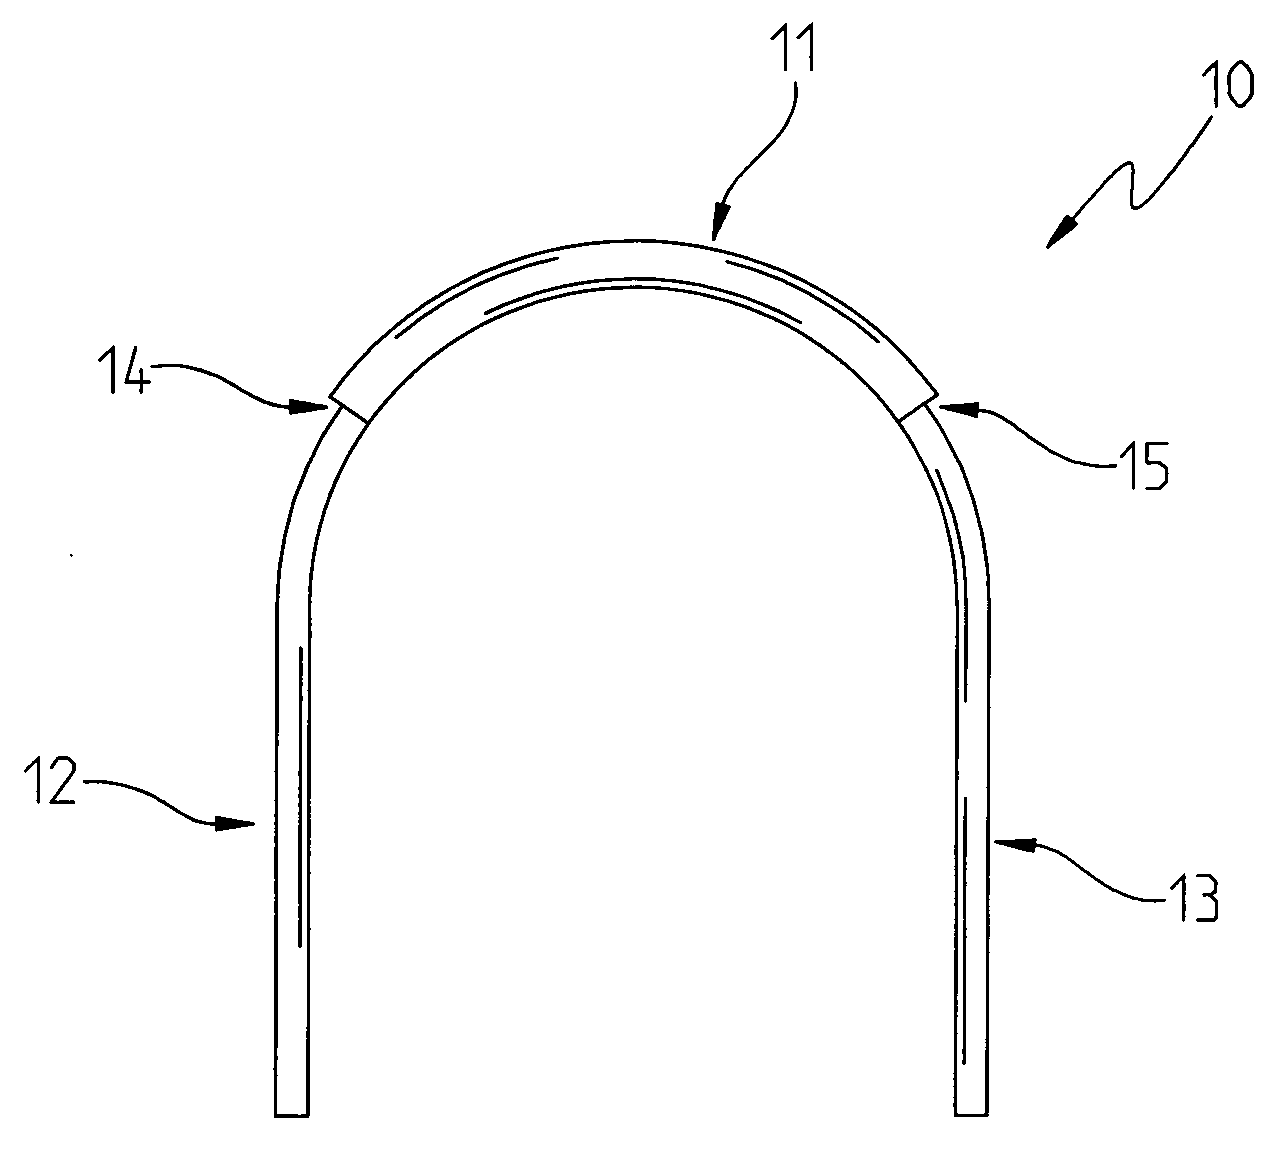 Differential Archwire